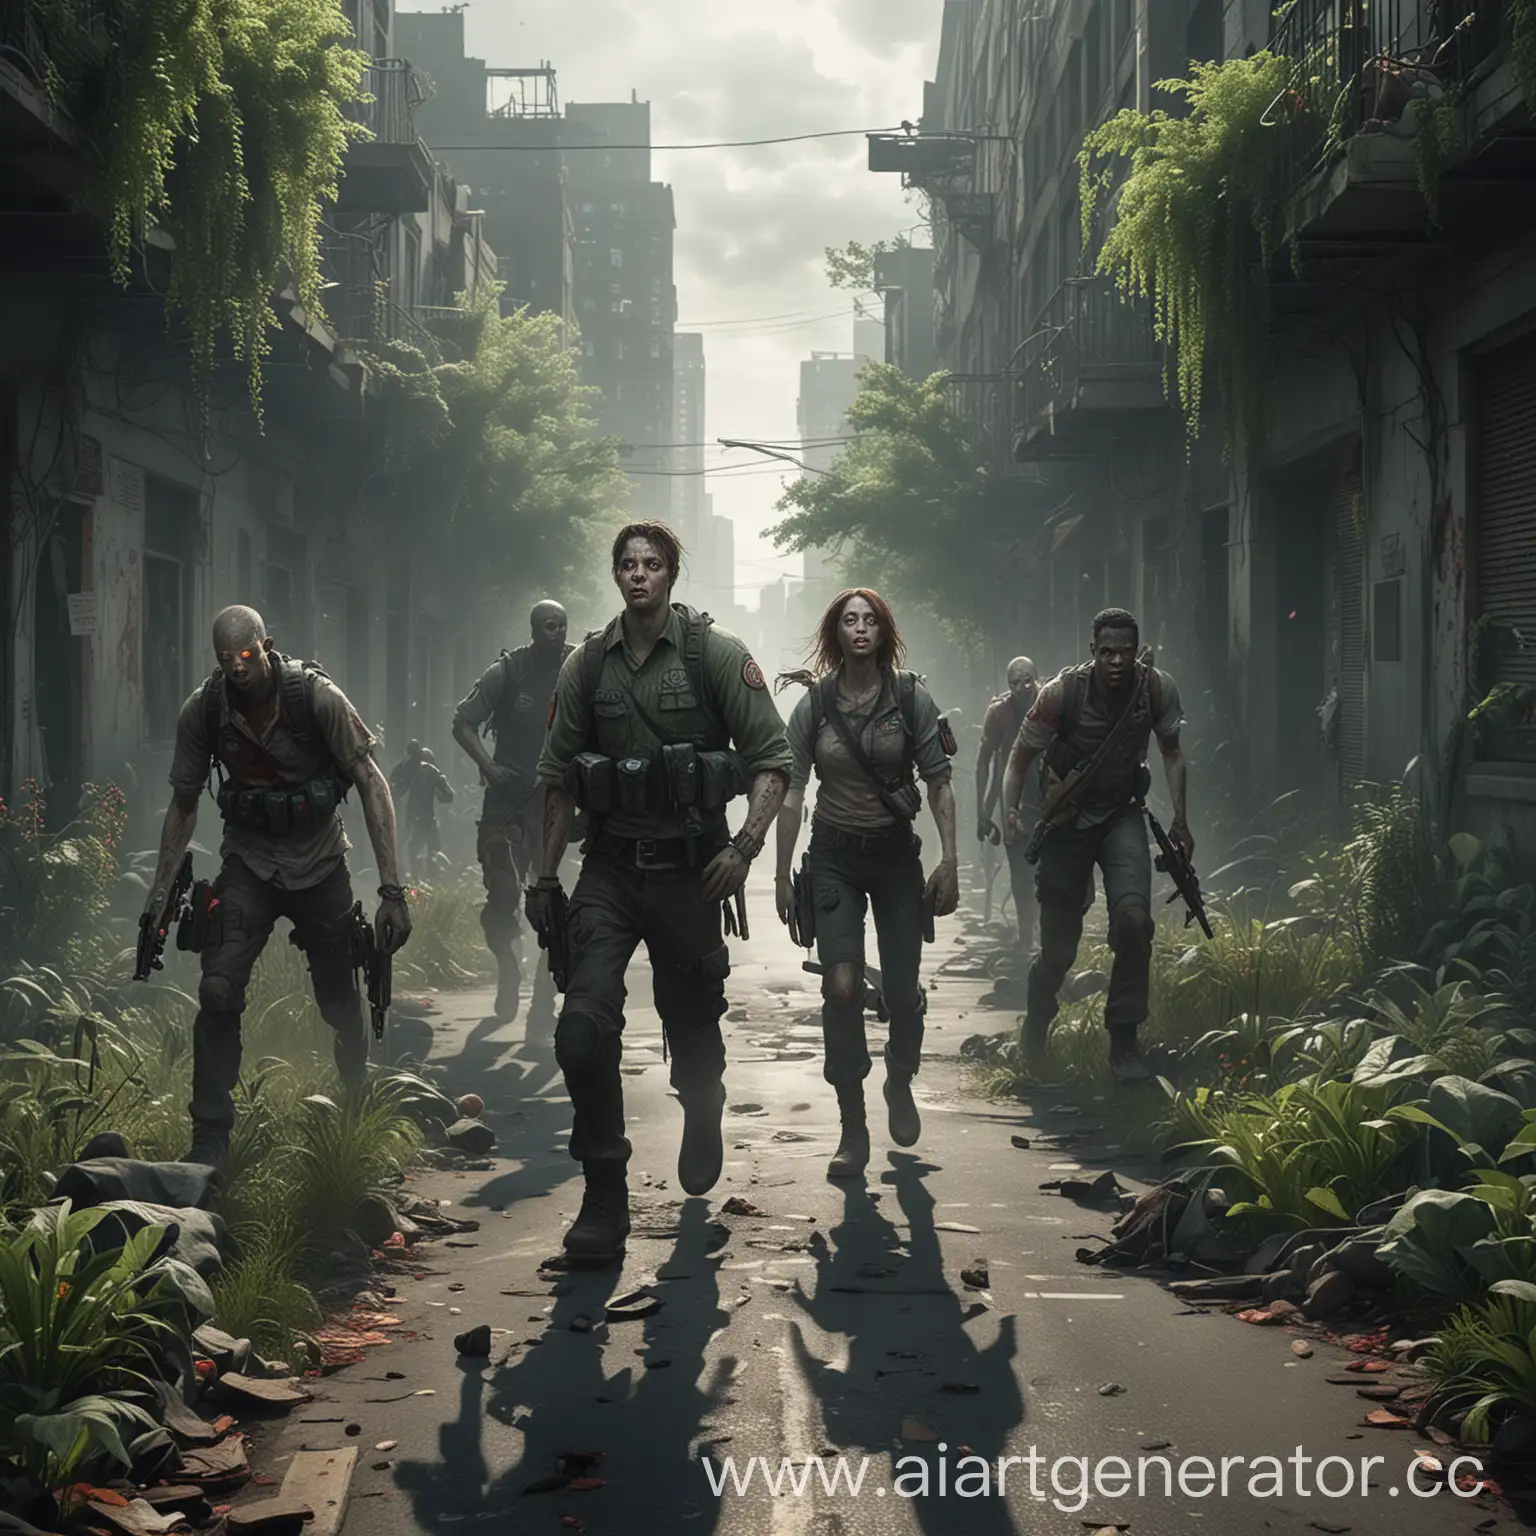 Surviving-Squad-Clears-Overgrown-City-Street-of-Zombies